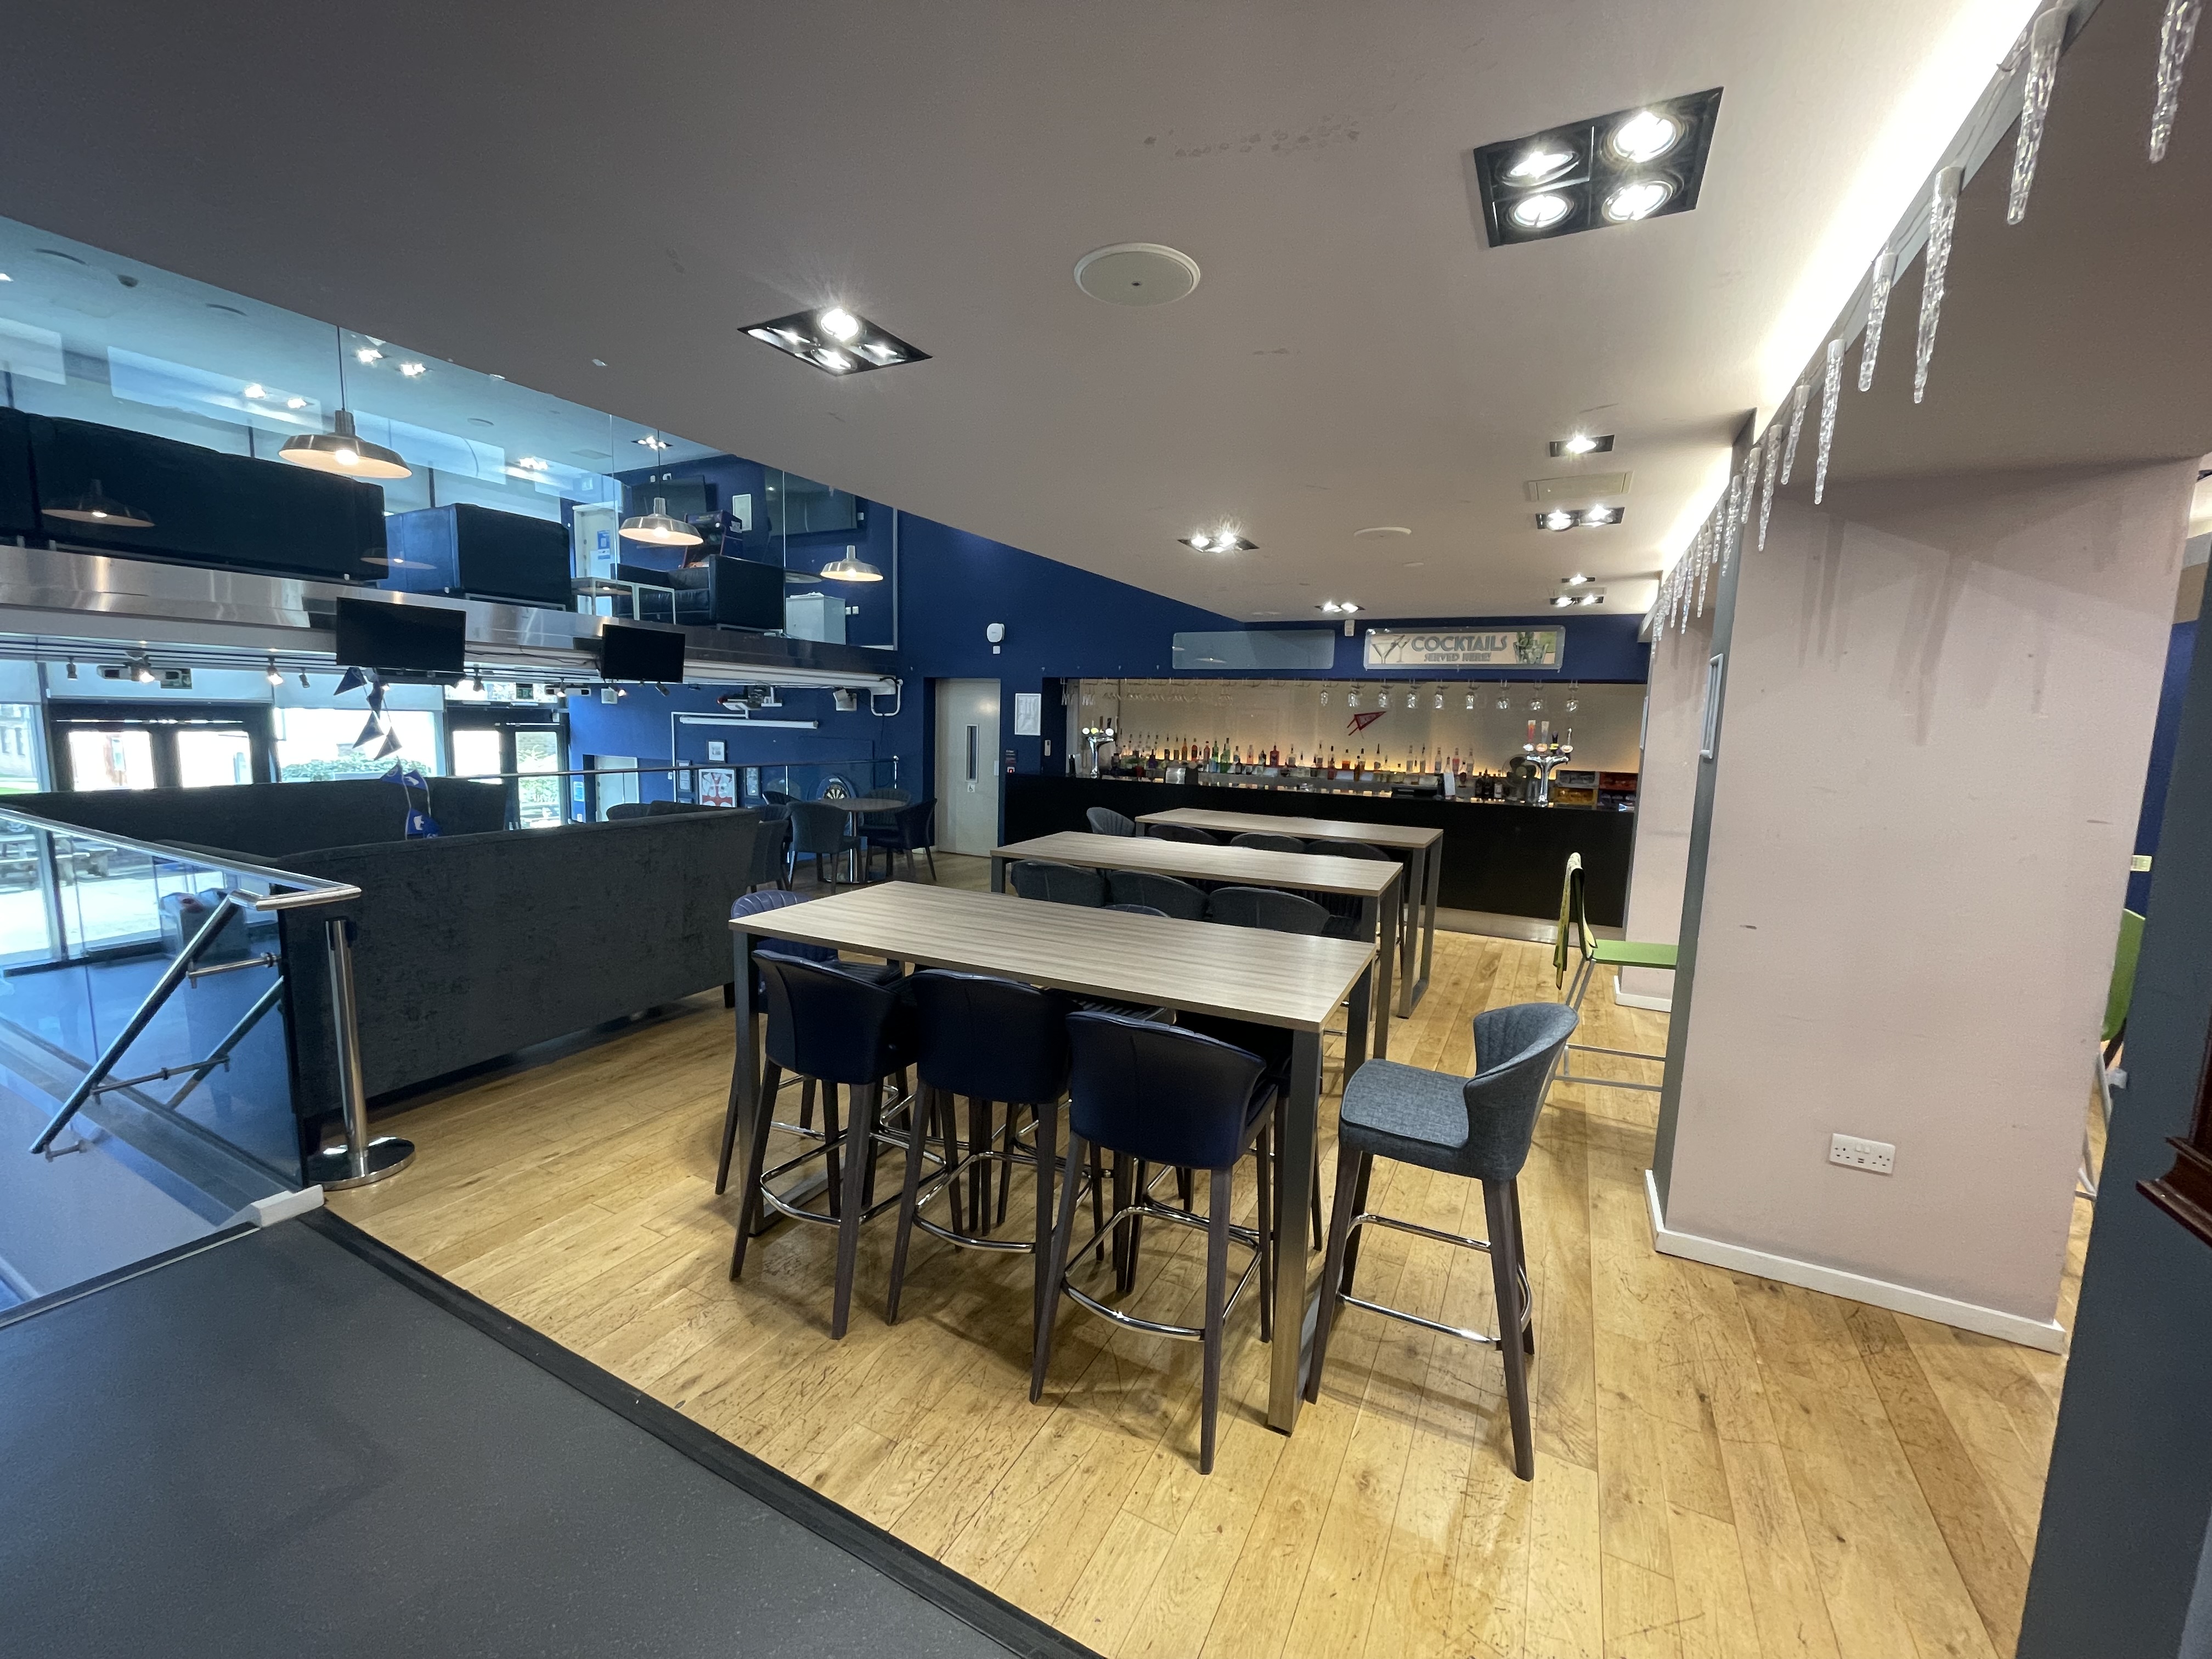 Grizedale bar, a college bar at Lancaster University campus. The bar area is located at the back, with blue bar stools and tables in front.